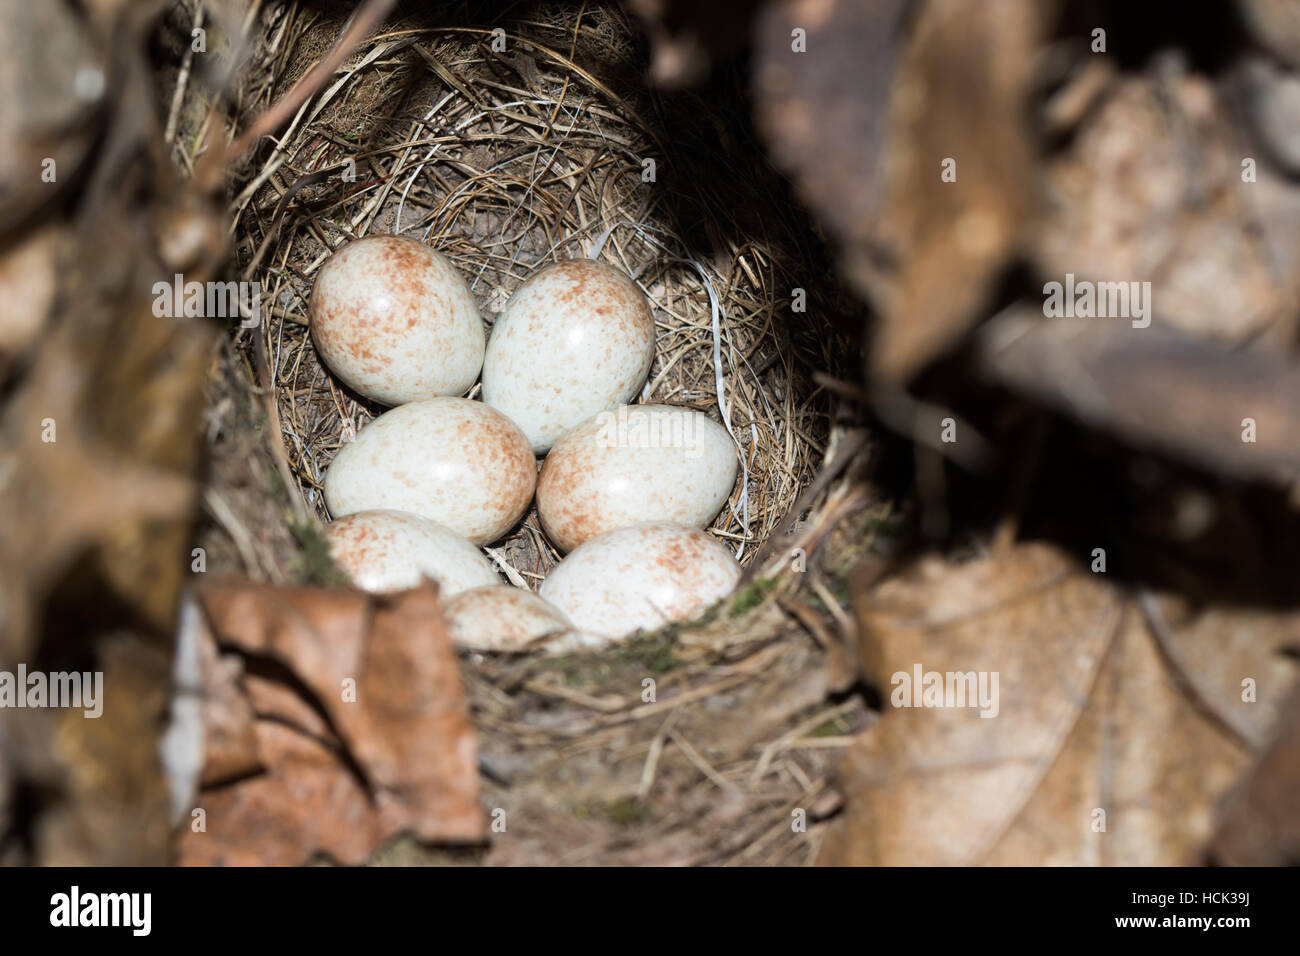 Erithacus rubecula. The nest of the Robin in nature. Stock Photo